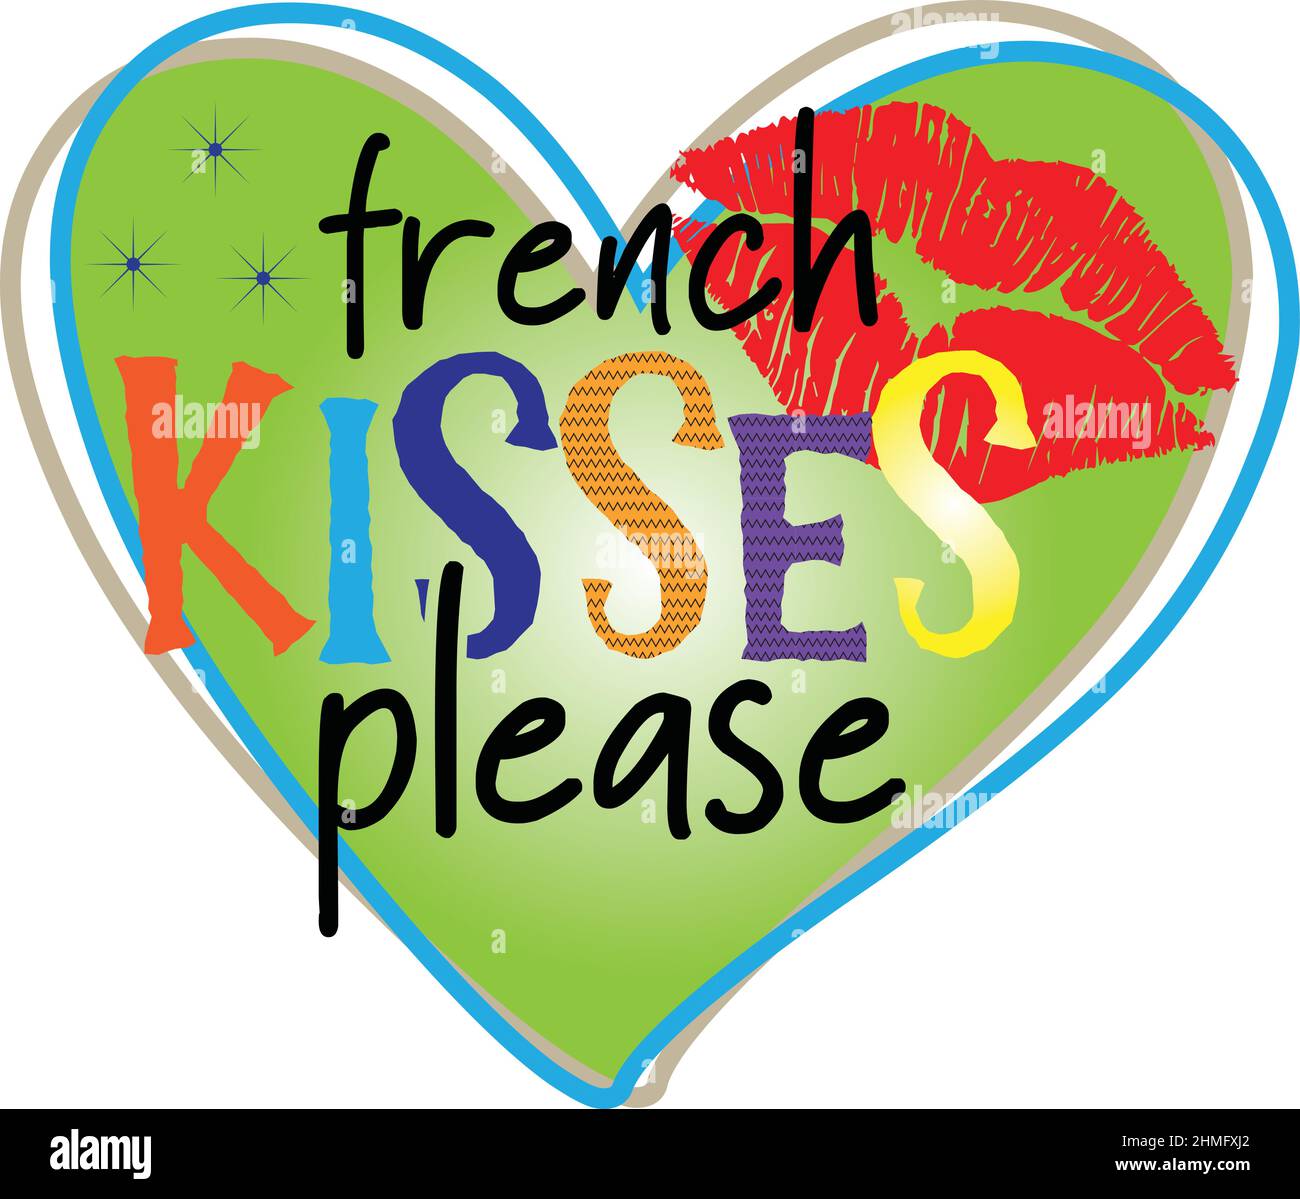 French kiss logo Stock Vector Images - Alamy